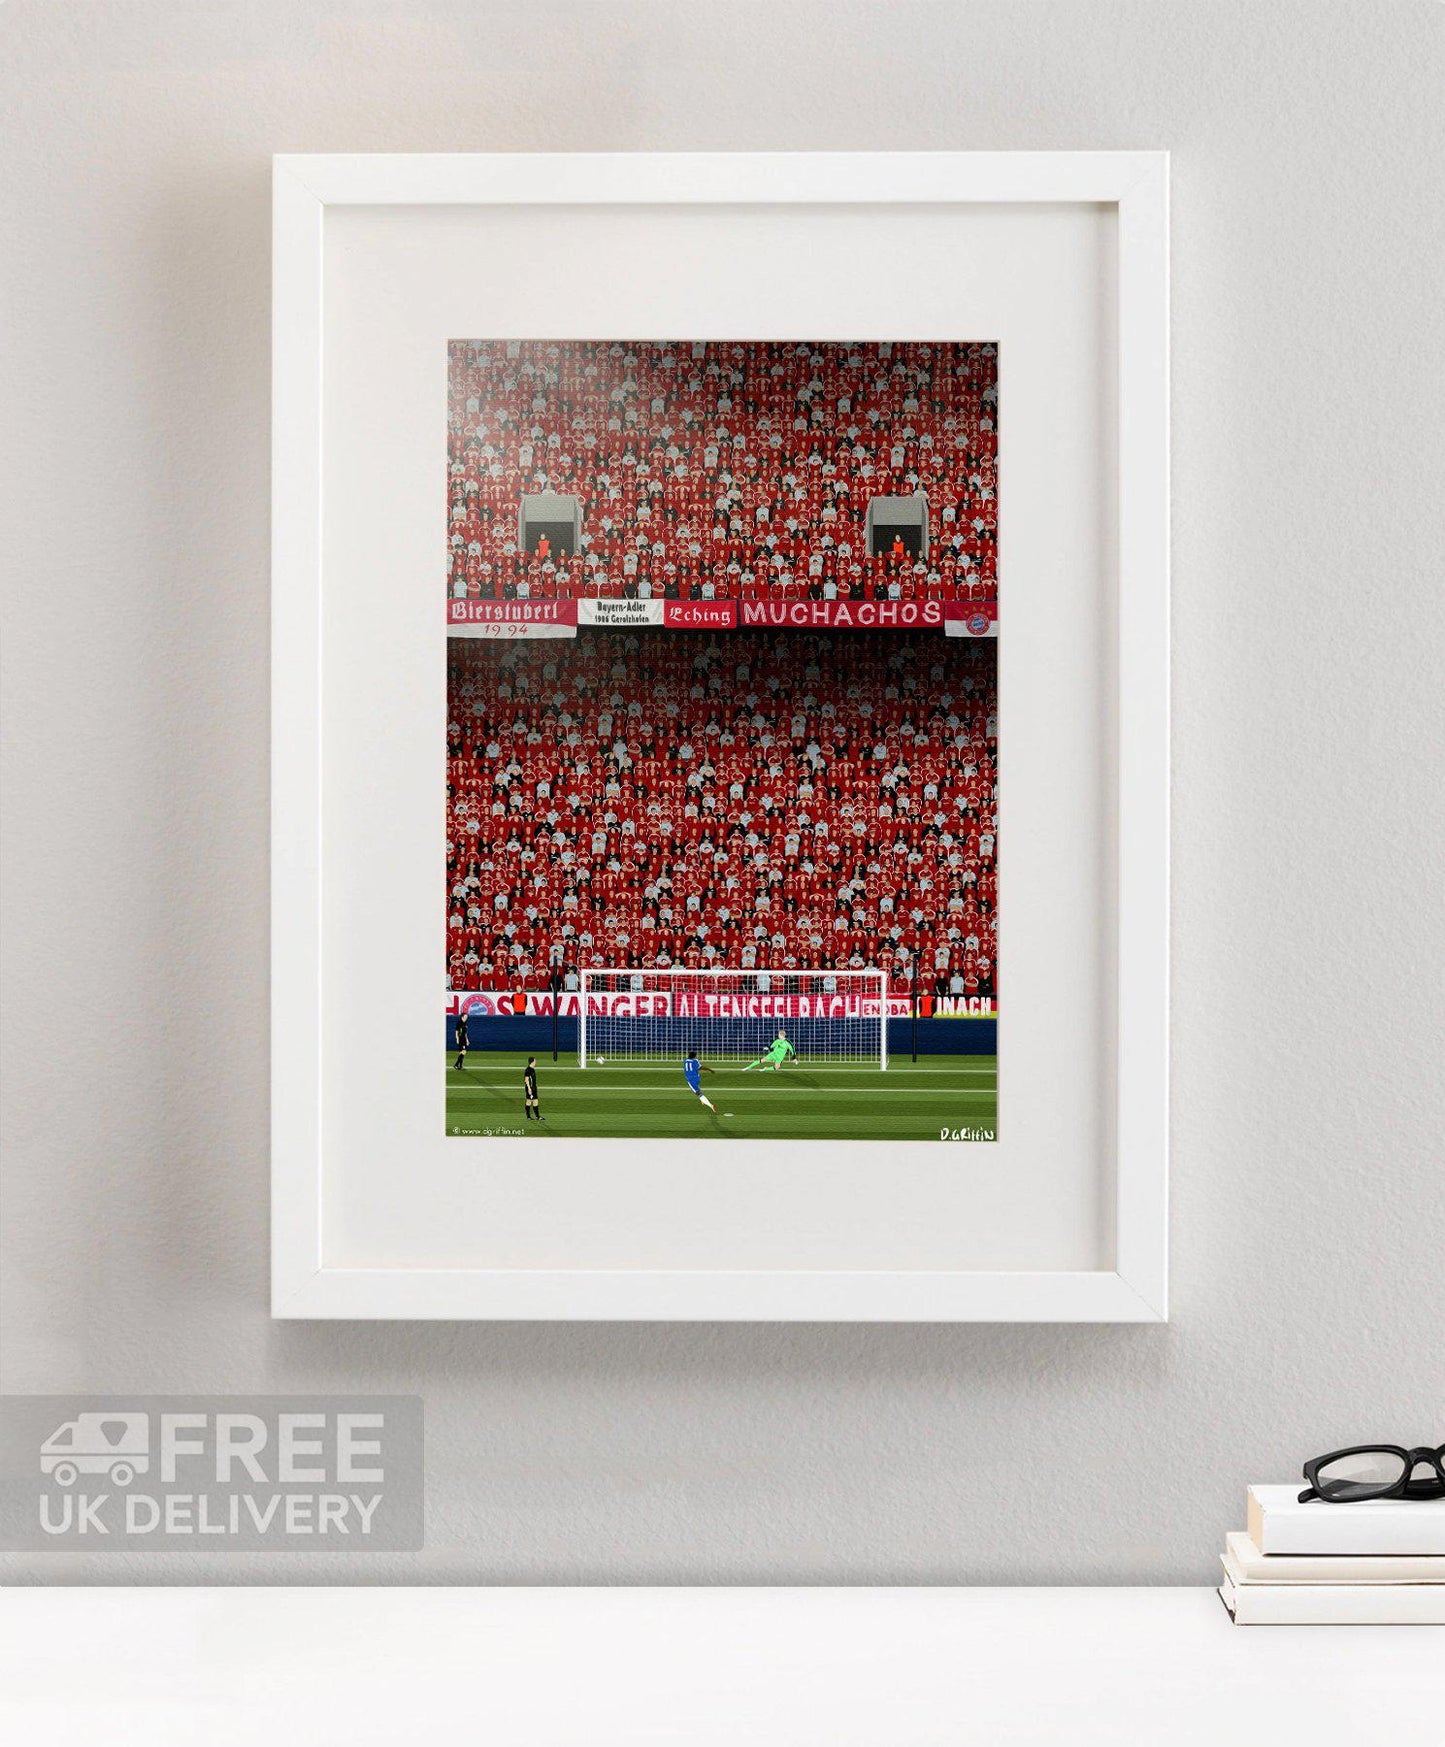 Chelsea - Champions League Final 2012 Print - North Section